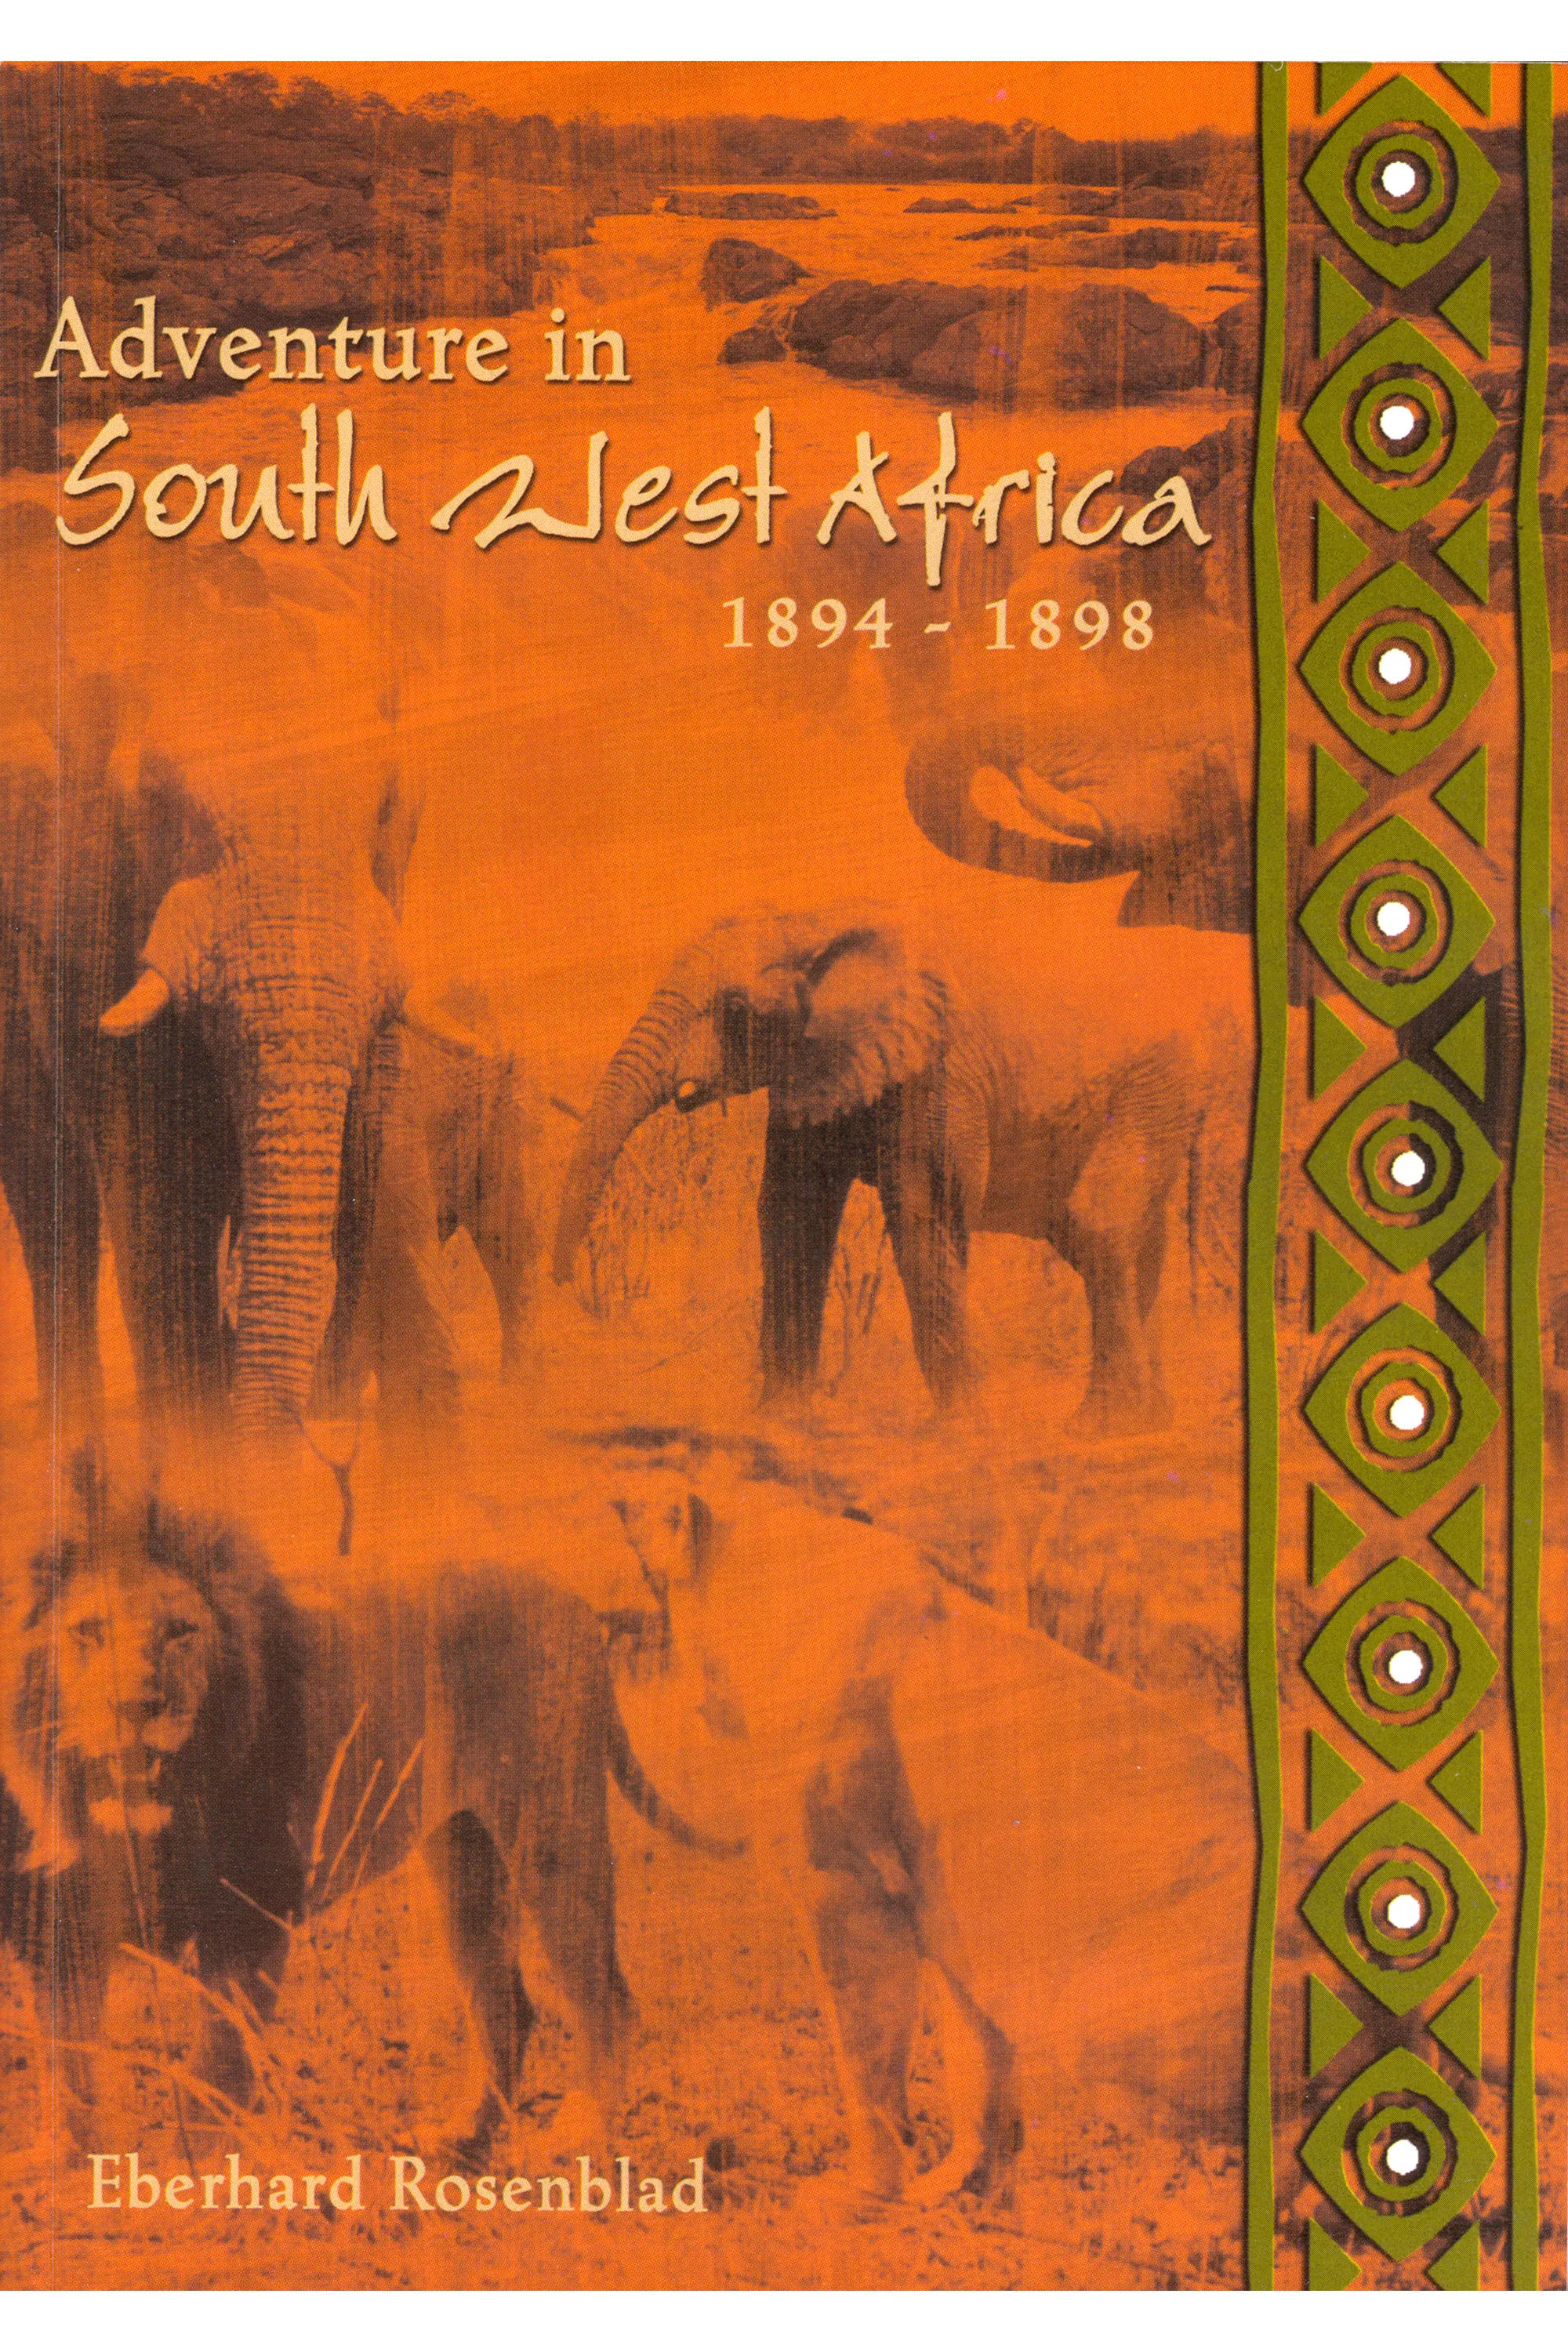 Adventure in South West Africa 1894-1898 Front